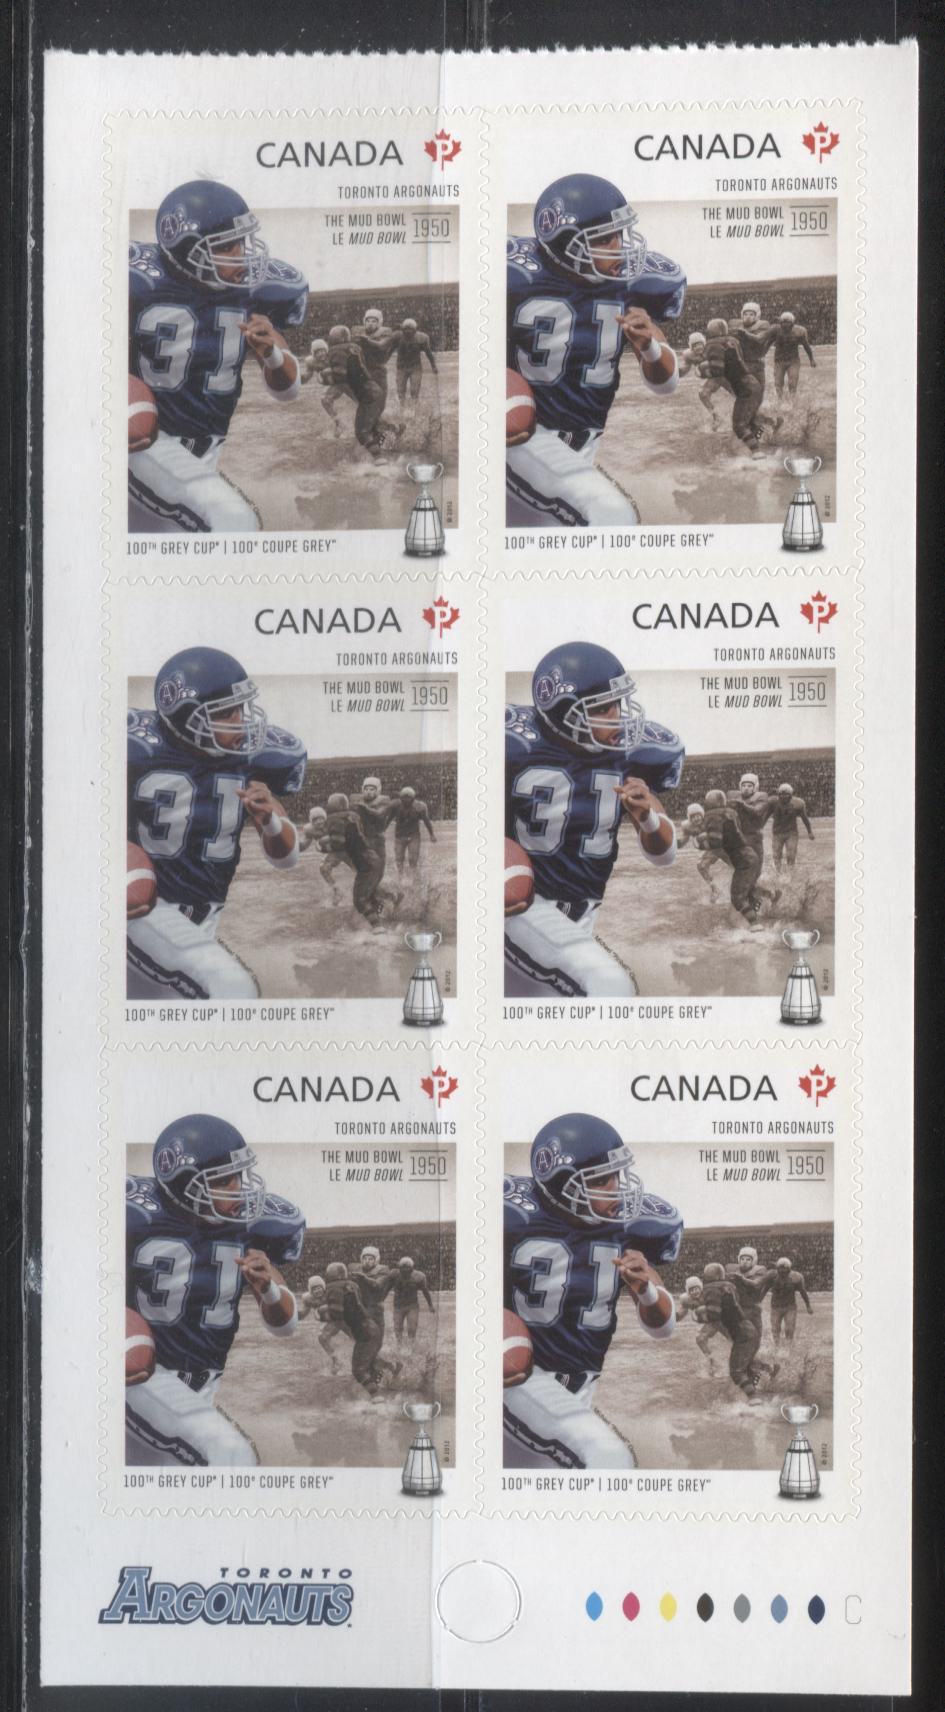 Lot 82 Canada #2574-2576 2012 100th Grey Cup Game Issue, VFNH Booklet Panes of 6 of the Hamilton Tiger Cats, Toronto Argonauts and Montreal Alouettes on LF TRC Paper